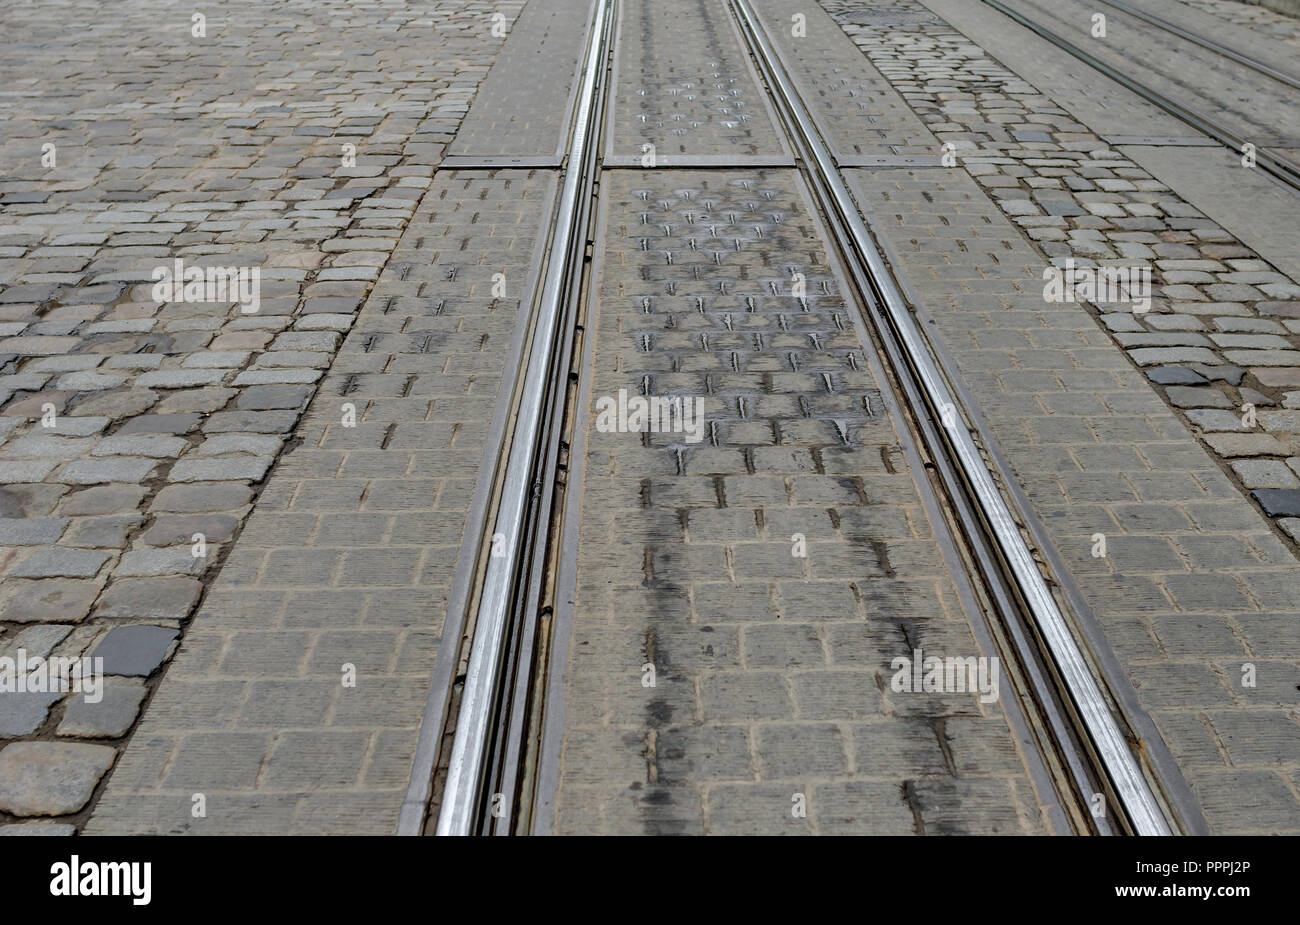 Ways for a city tram. Photographed against the background of pavers. Stock Photo